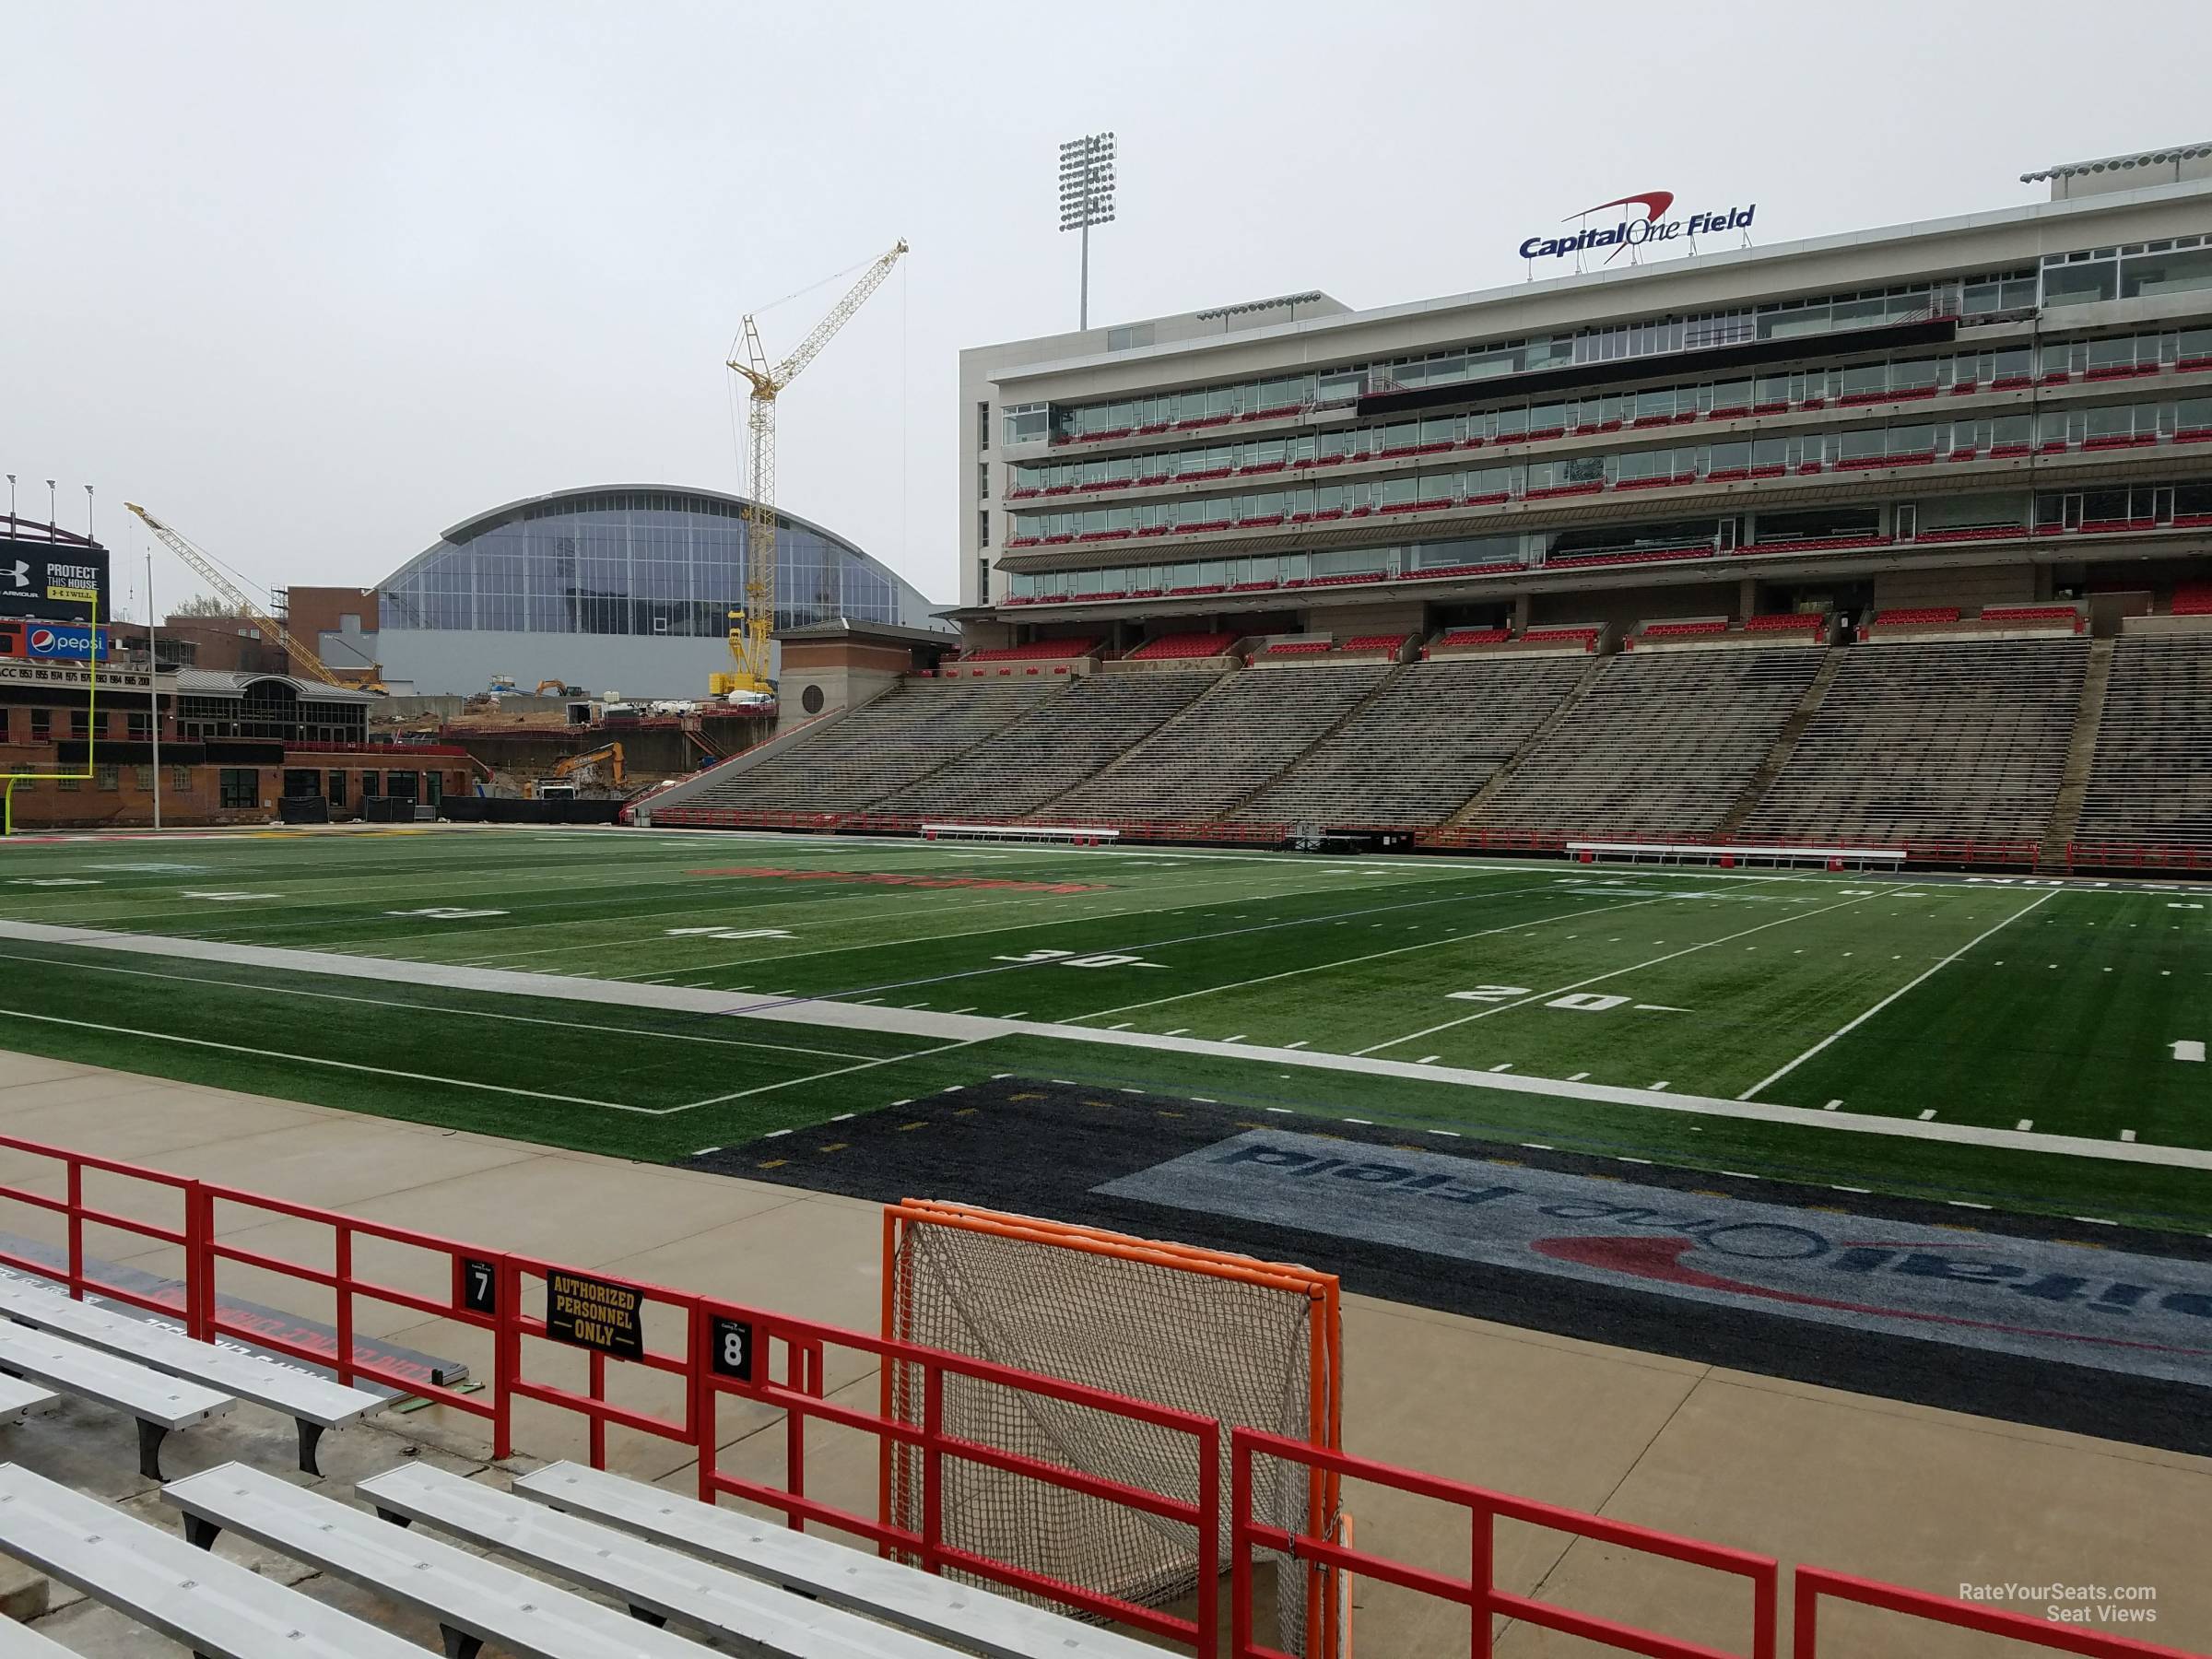 section 8, row g seat view  - maryland stadium